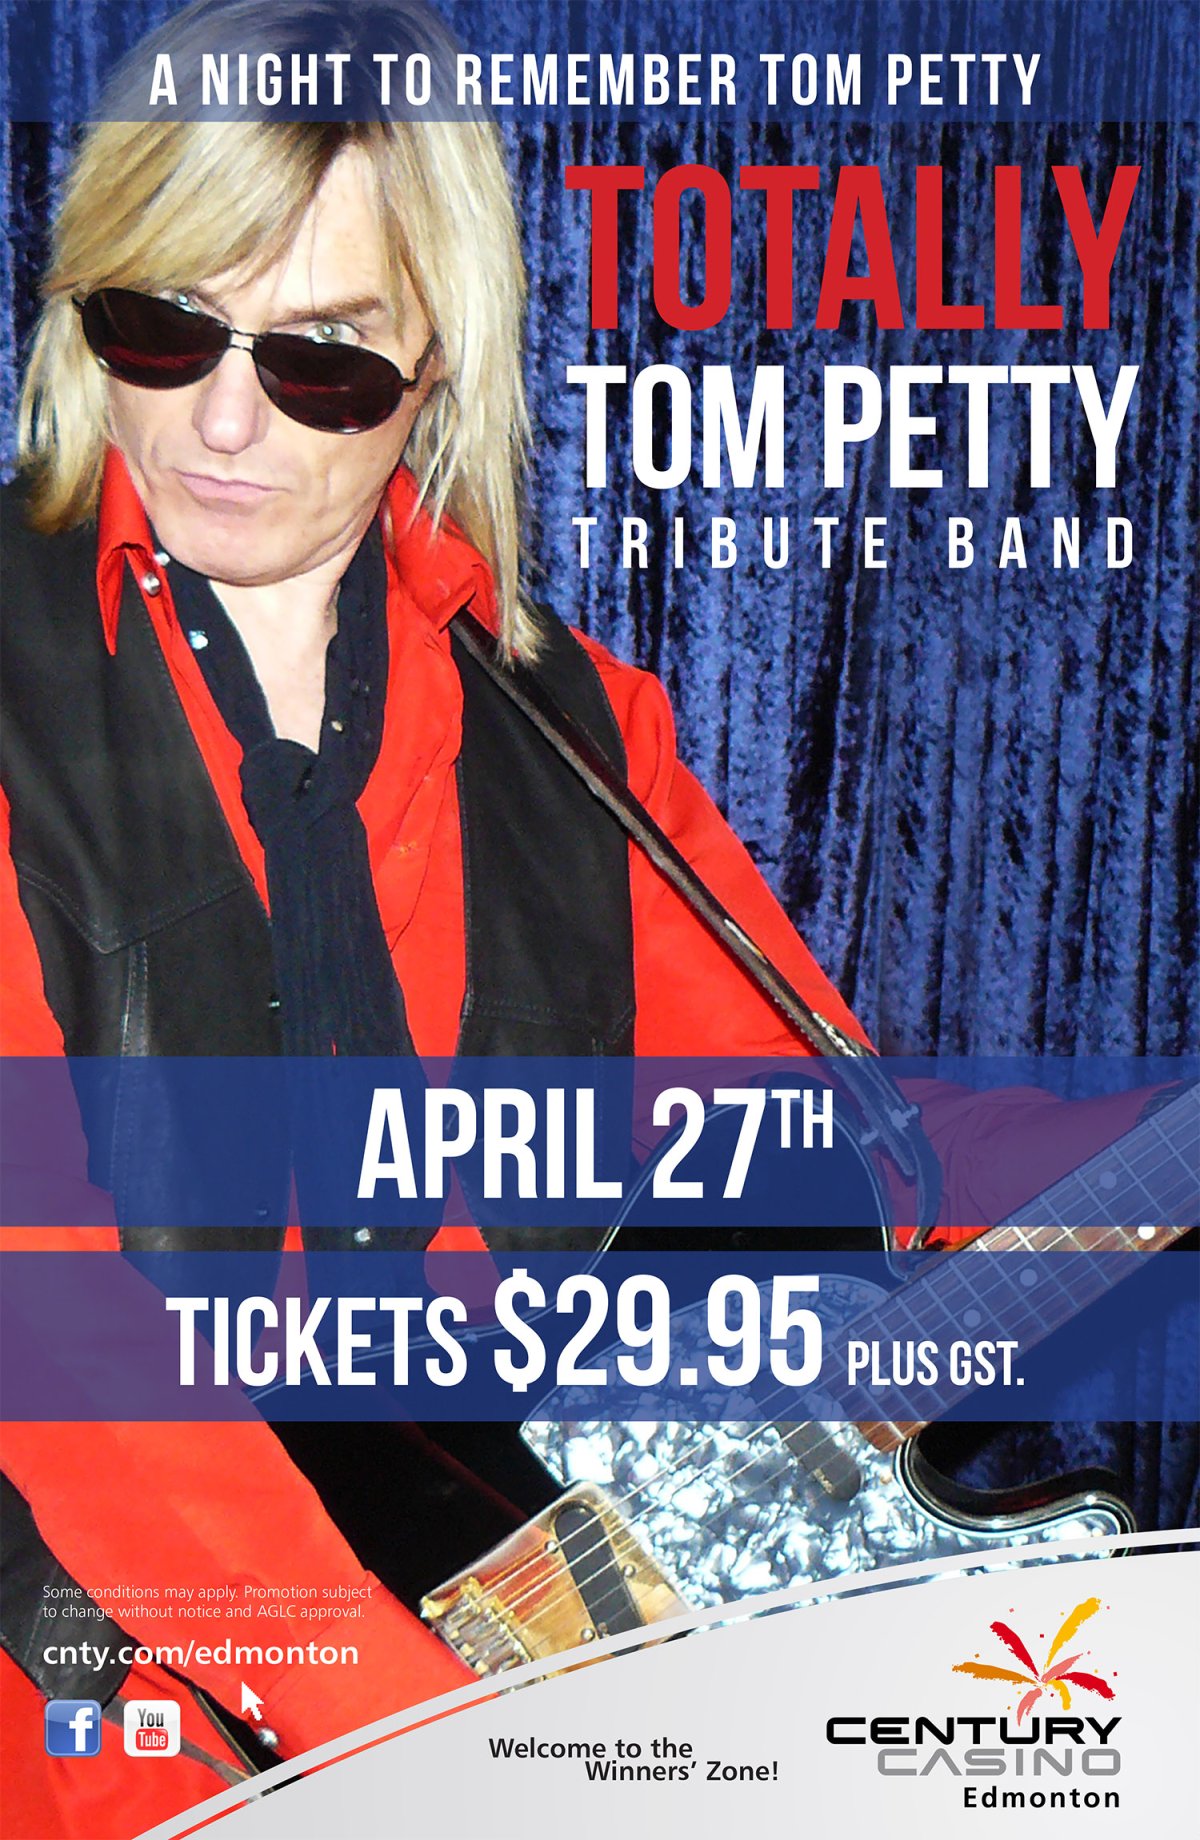 A Night to Remember Tom Petty : Totally Tom Petty Tribute - image